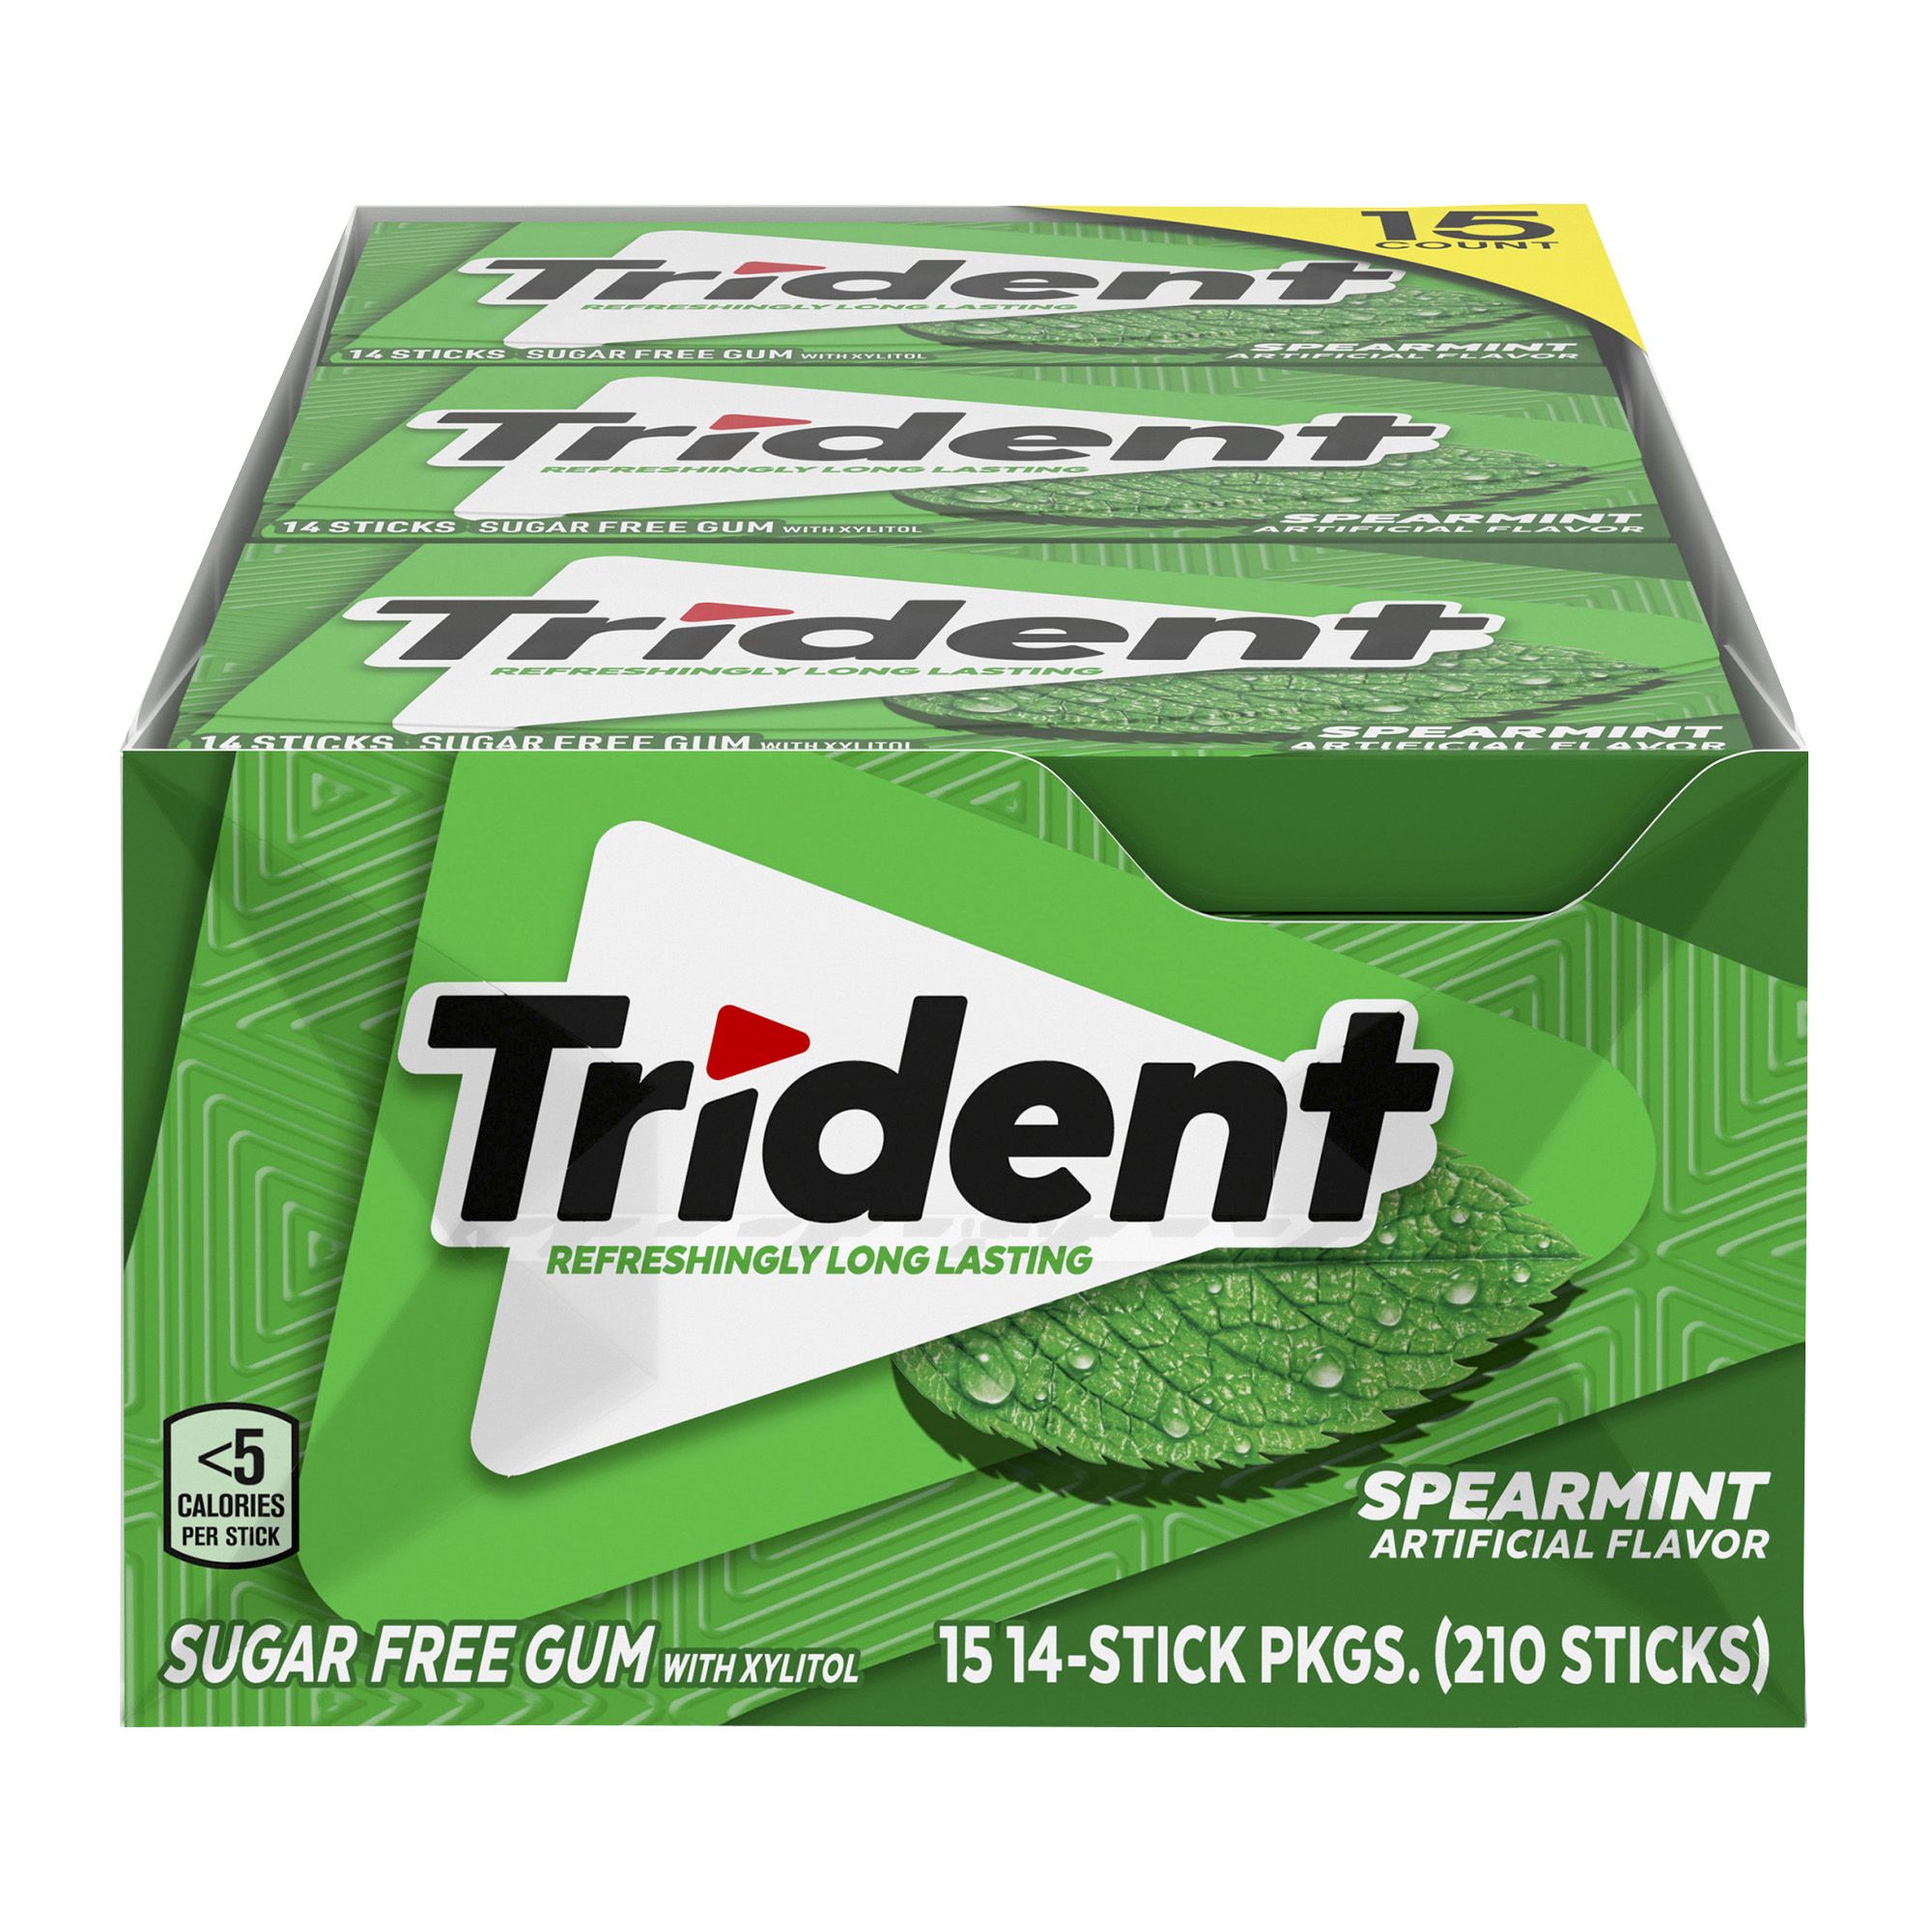 Extra Peppermint and Spearmint Sugar Free Gum, 35 ct.